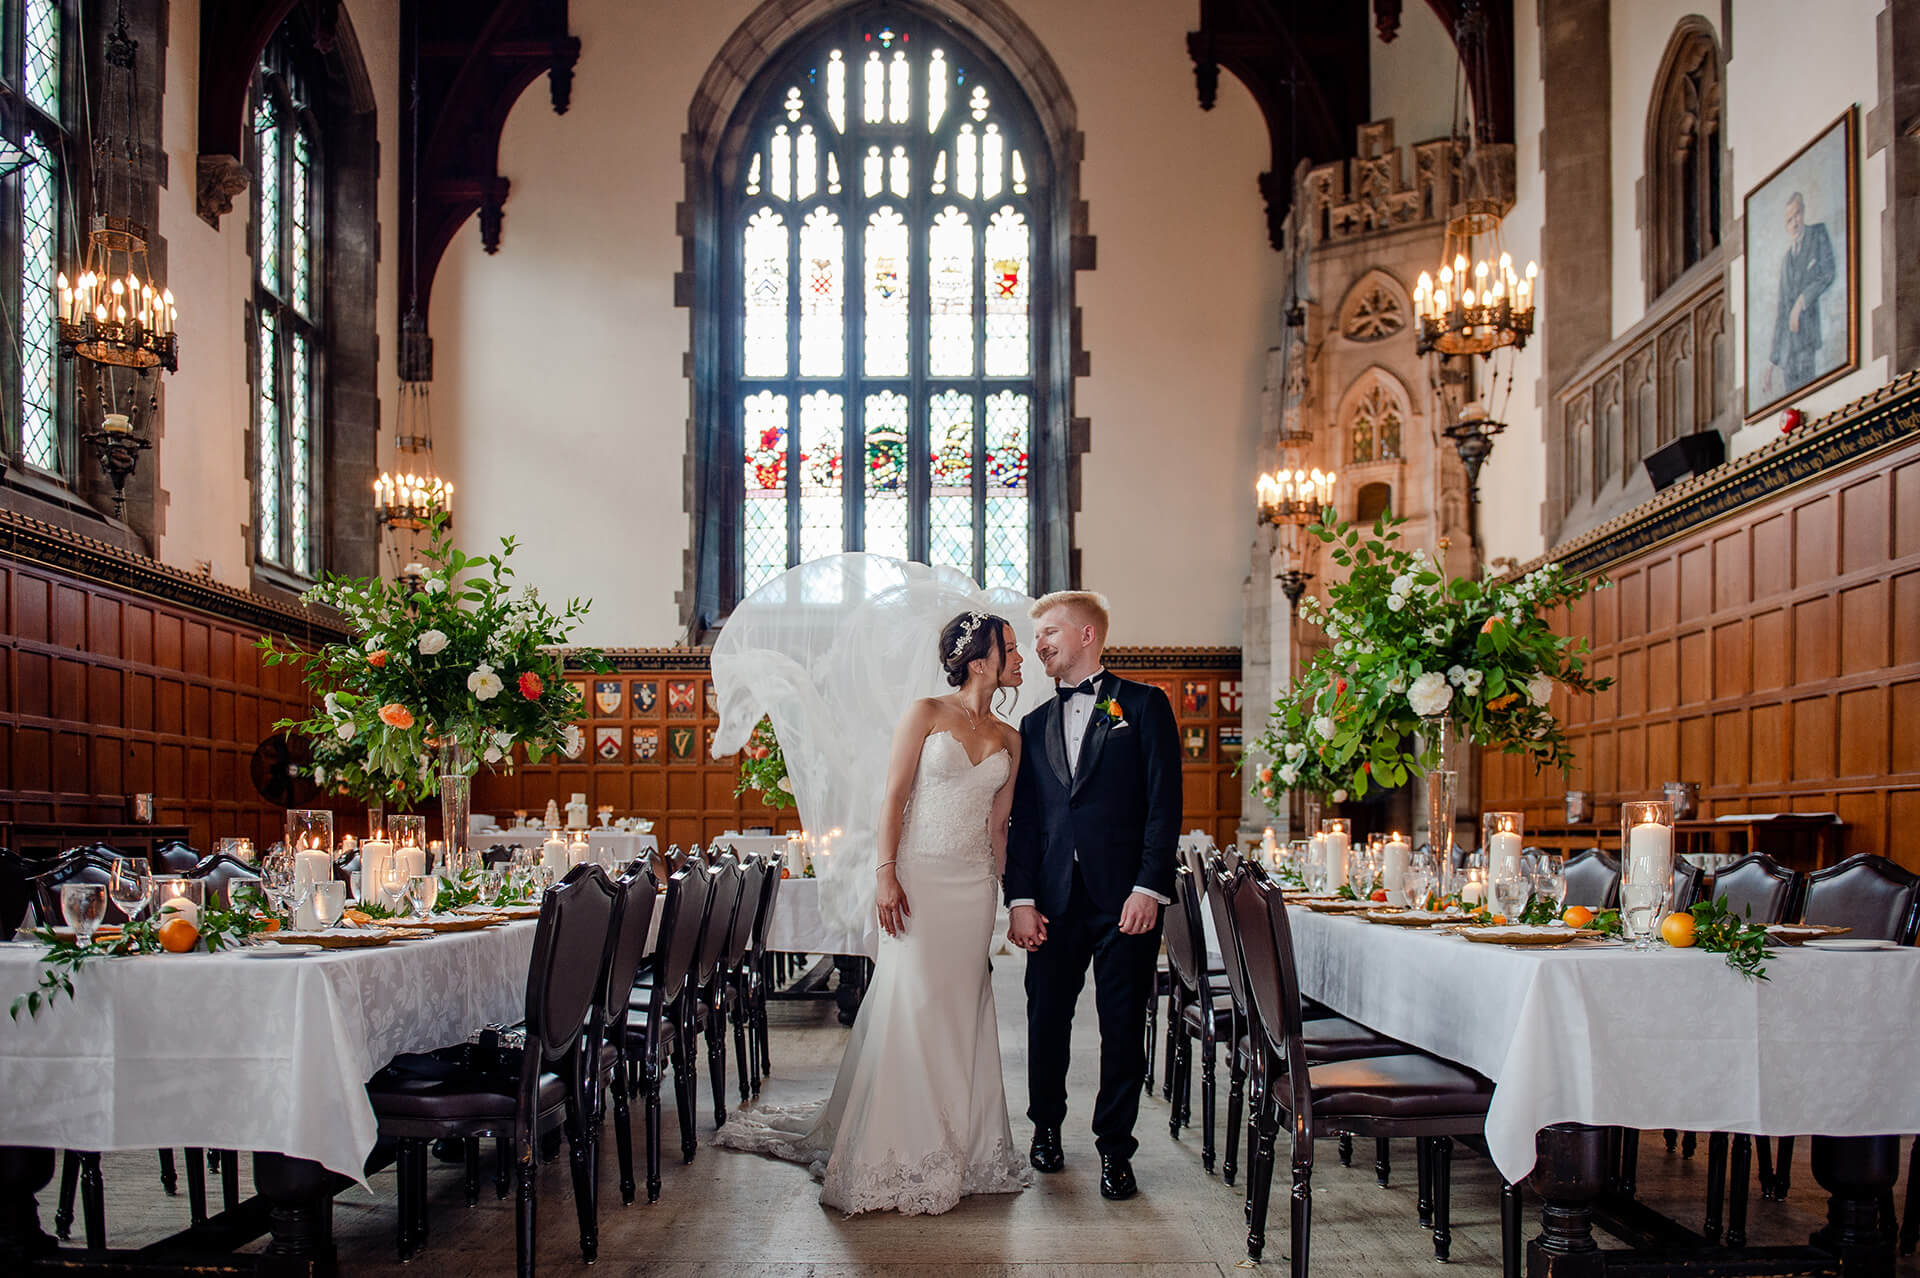 A happy couple stands in the Great Hall, surrounded by tables awaiting their dinner guests